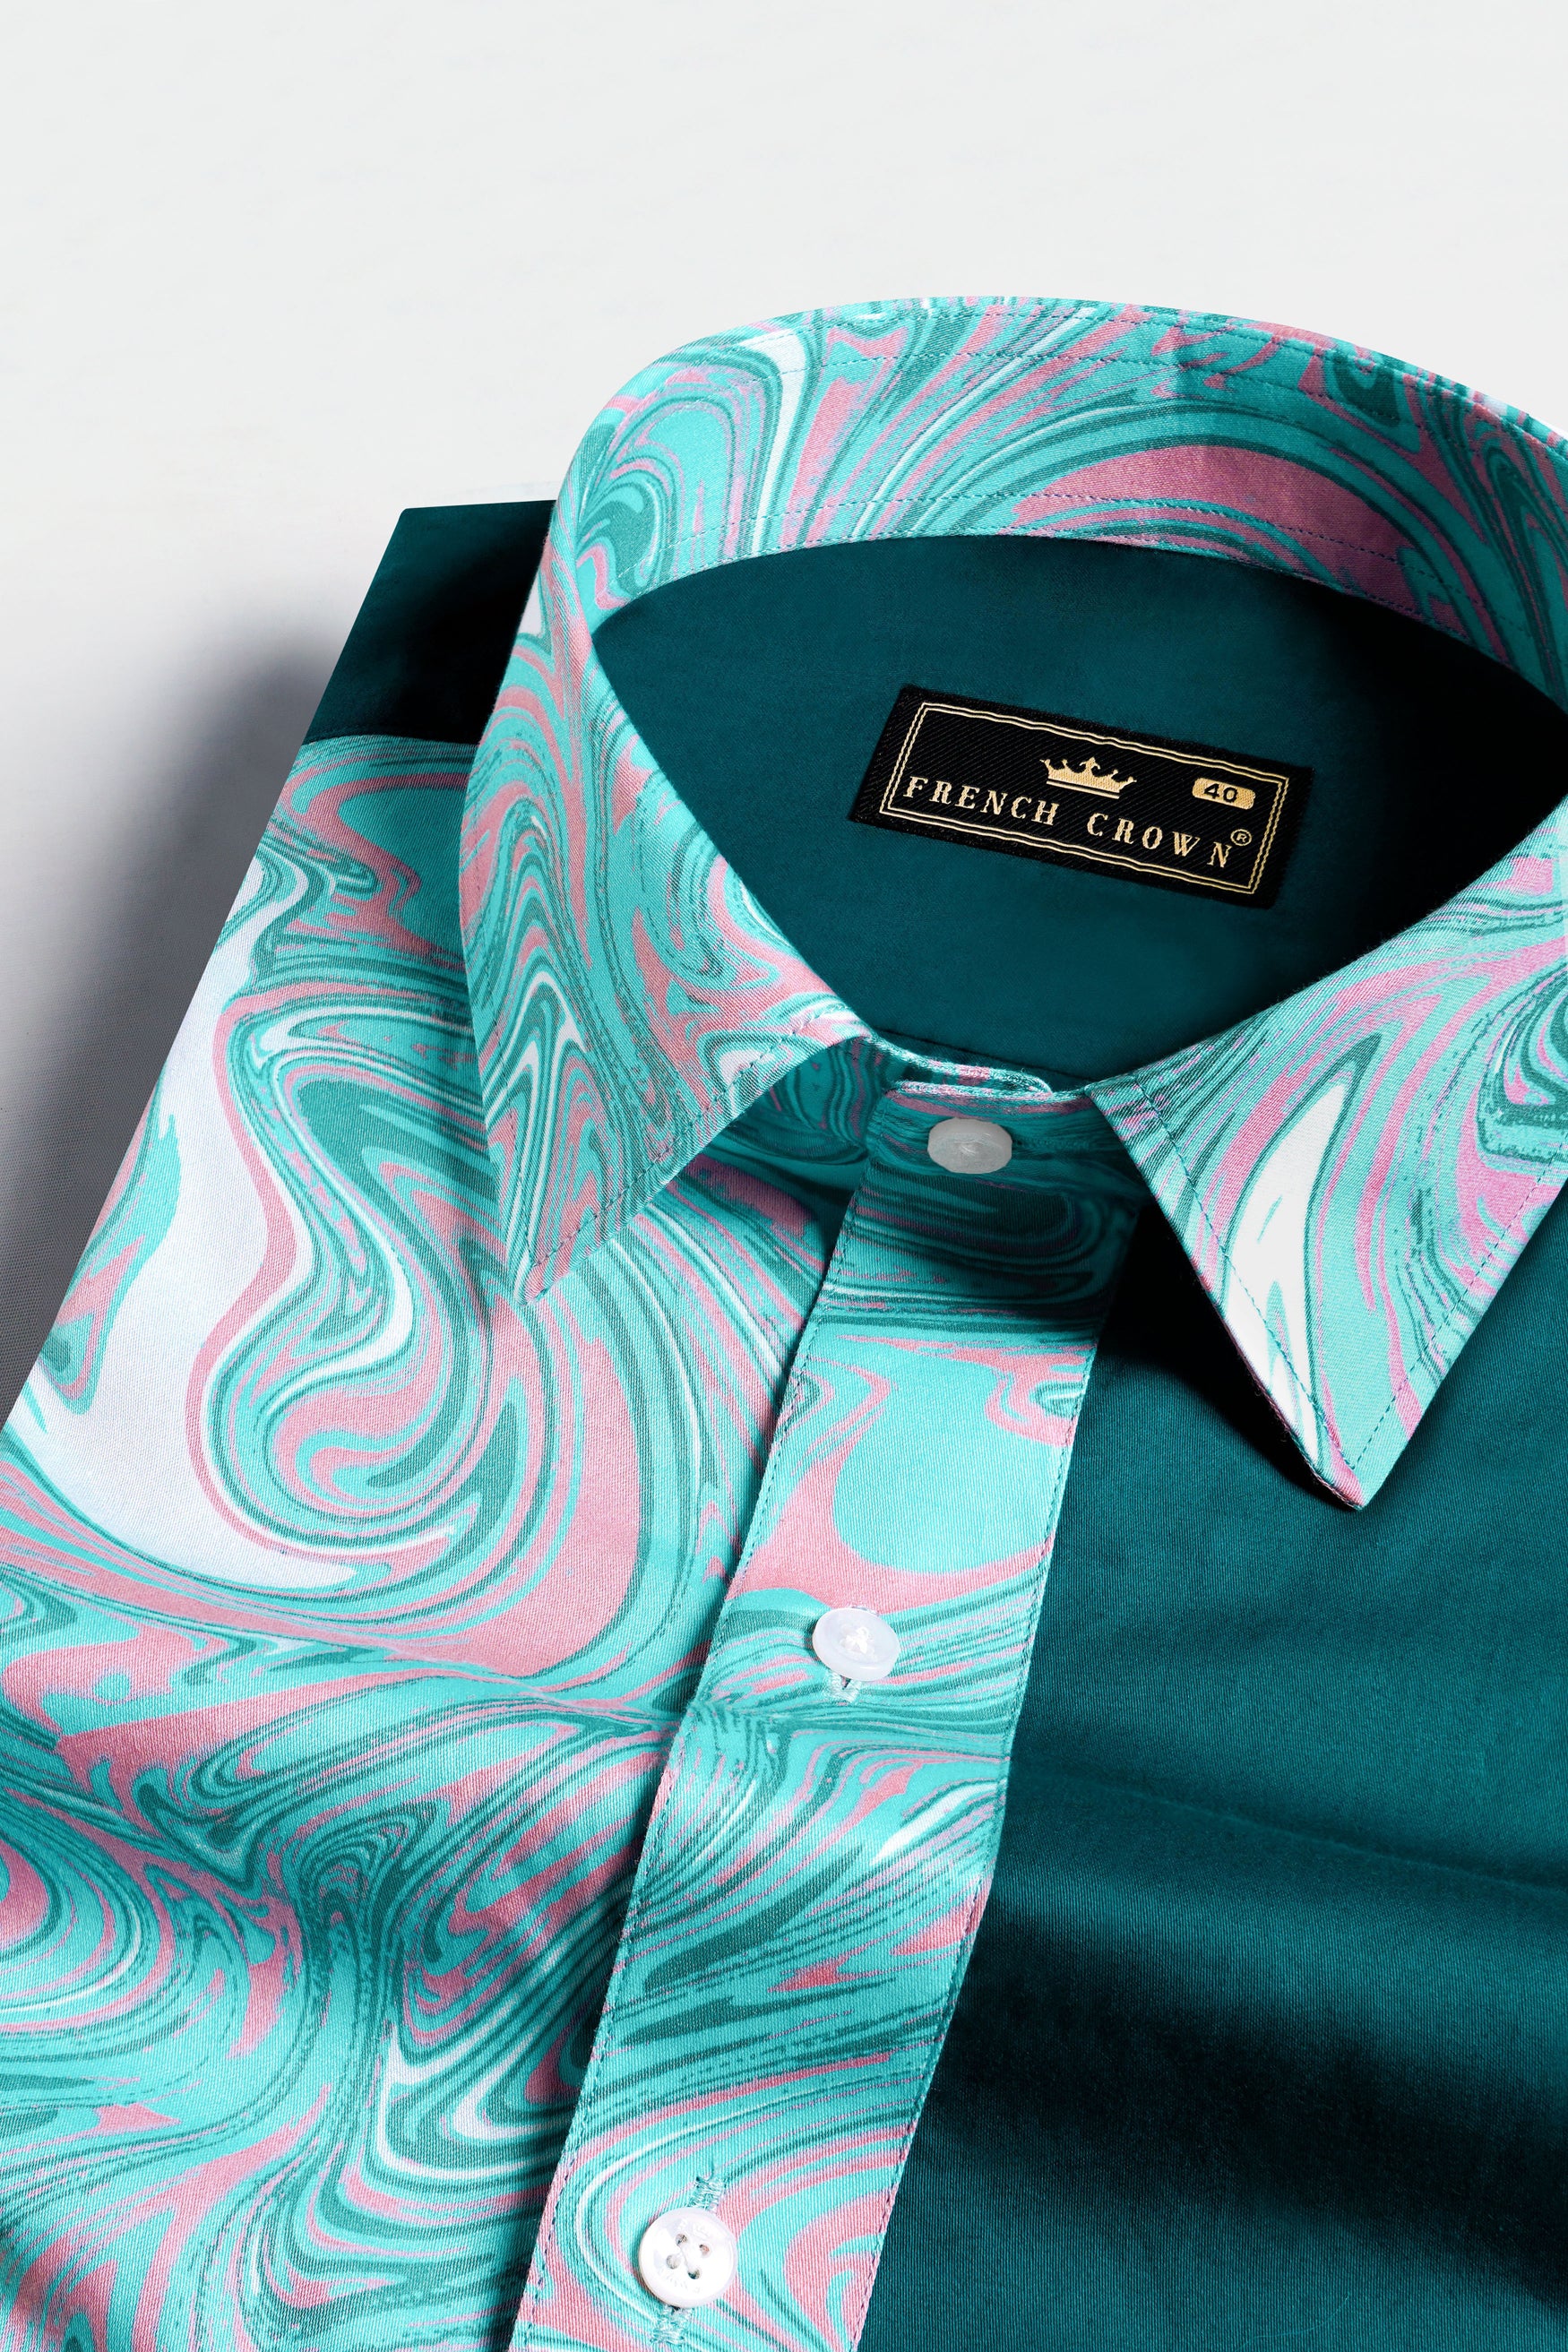 Teal Green with Blizzard Blue and Cavern Pink Marble Printed Subtle Sheen Super Soft Premium Cotton Designer Shirt 11949-P815-38, 11949-P815-H-38, 11949-P815-39, 11949-P815-H-39, 11949-P815-40, 11949-P815-H-40, 11949-P815-42, 11949-P815-H-42, 11949-P815-44, 11949-P815-H-44, 11949-P815-46, 11949-P815-H-46, 11949-P815-48, 11949-P815-H-48, 11949-P815-50, 11949-P815-H-50, 11949-P815-52, 11949-P815-H-52